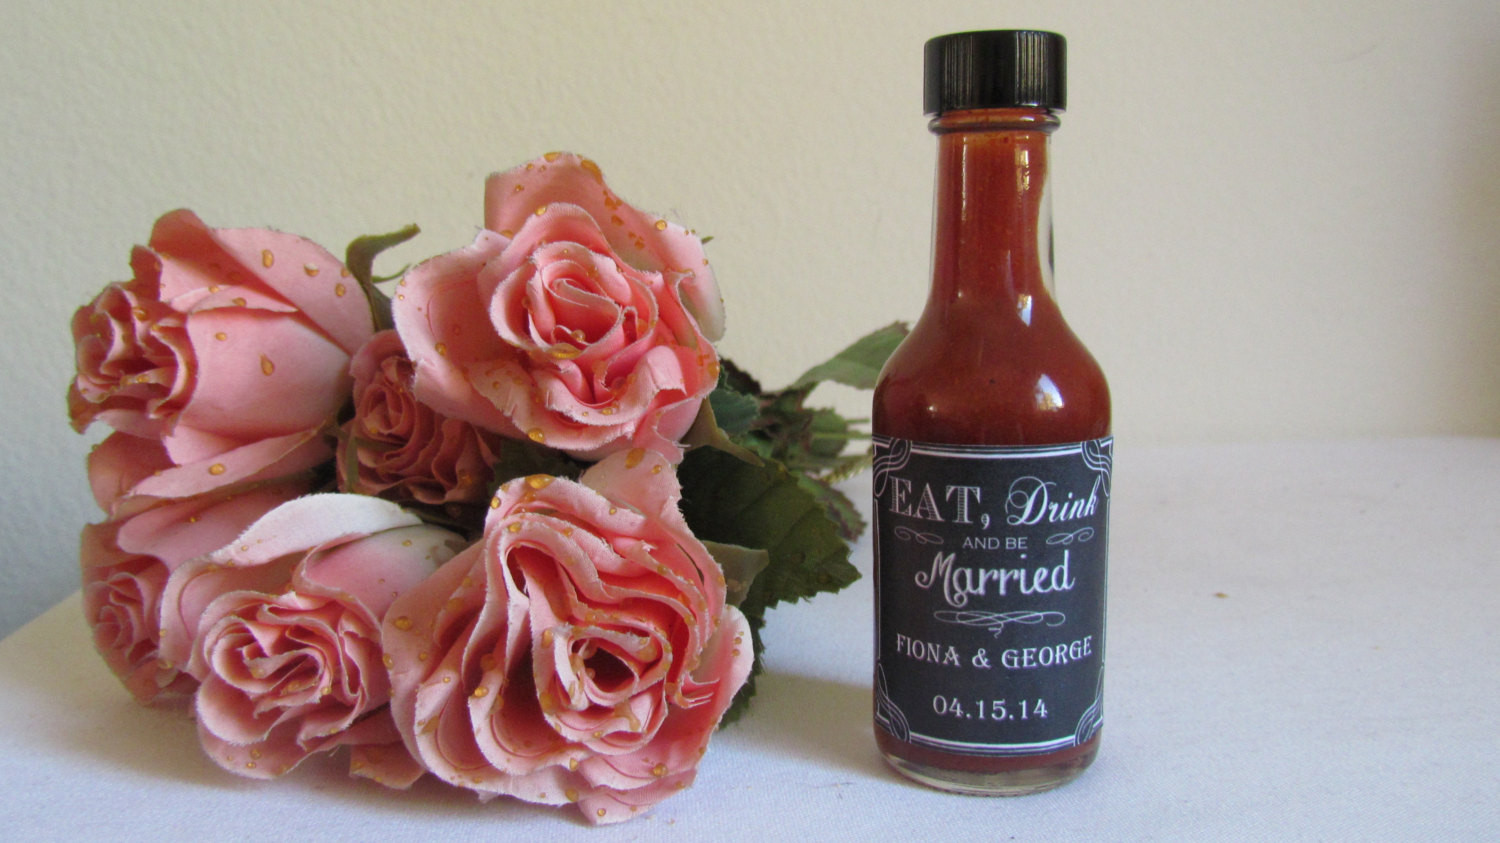 Hot Sauce Wedding Favors
 Wedding Hot Sauce Favors Eat Drink and be by InNonnasKitchen